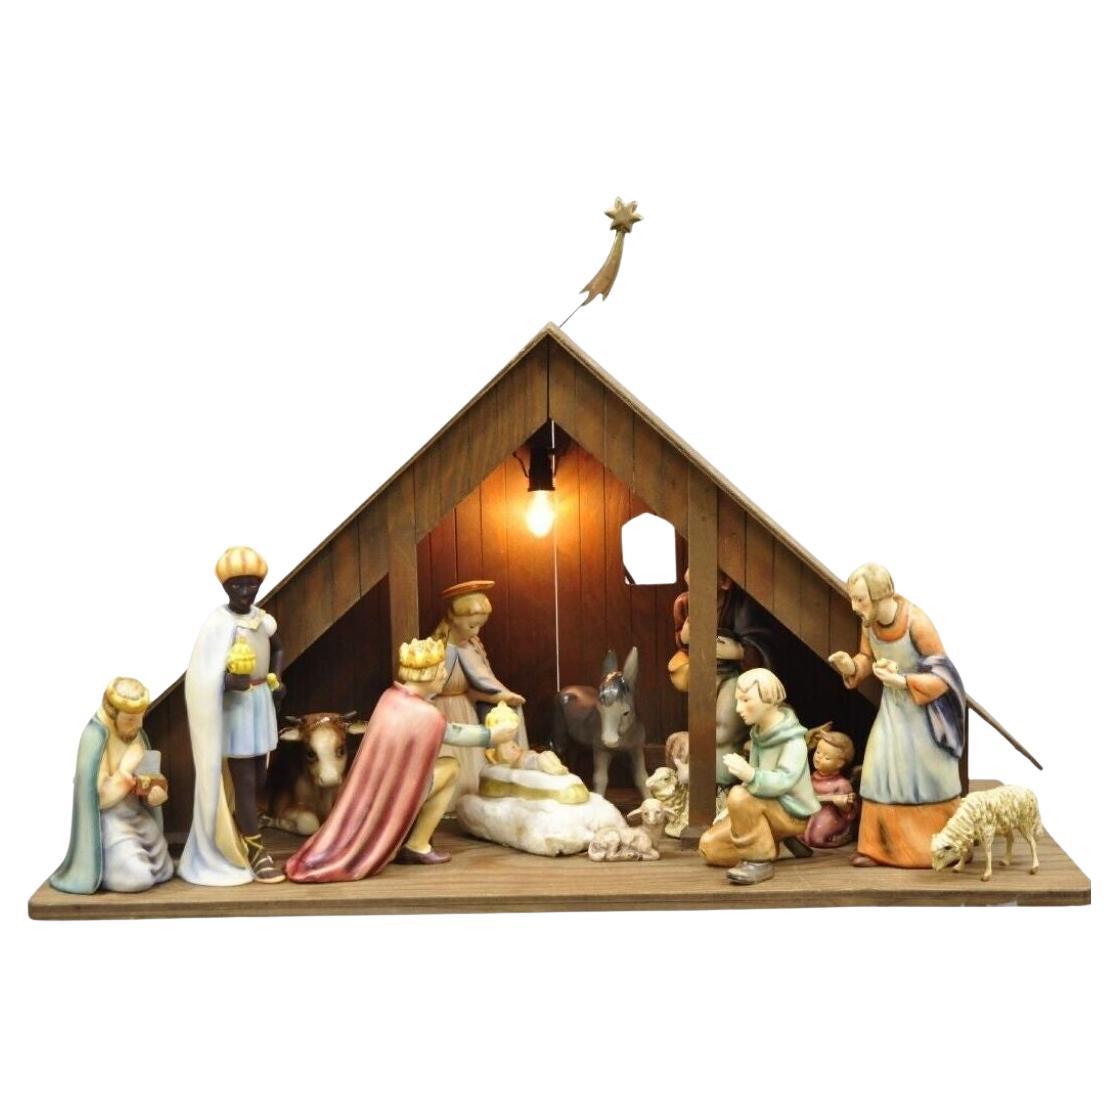 How many pieces should be in a nativity set?